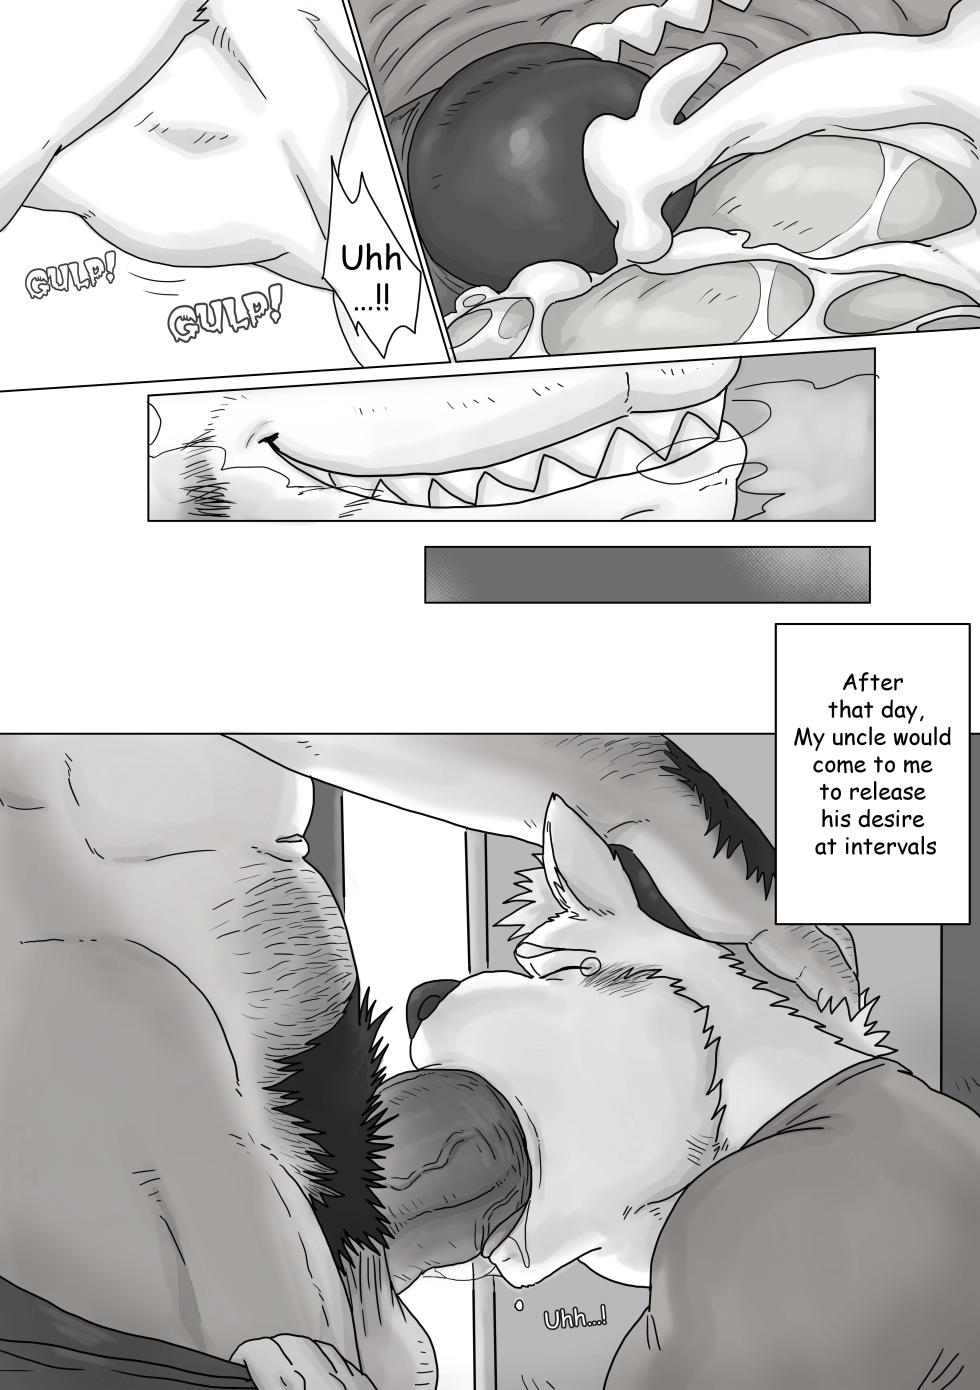 [Renoky] Jikka no Ossan wa Daisukebe!! | My hometown‘s uncle is a Horny Hung!! [English] [Decensored] [Digital] - Page 10